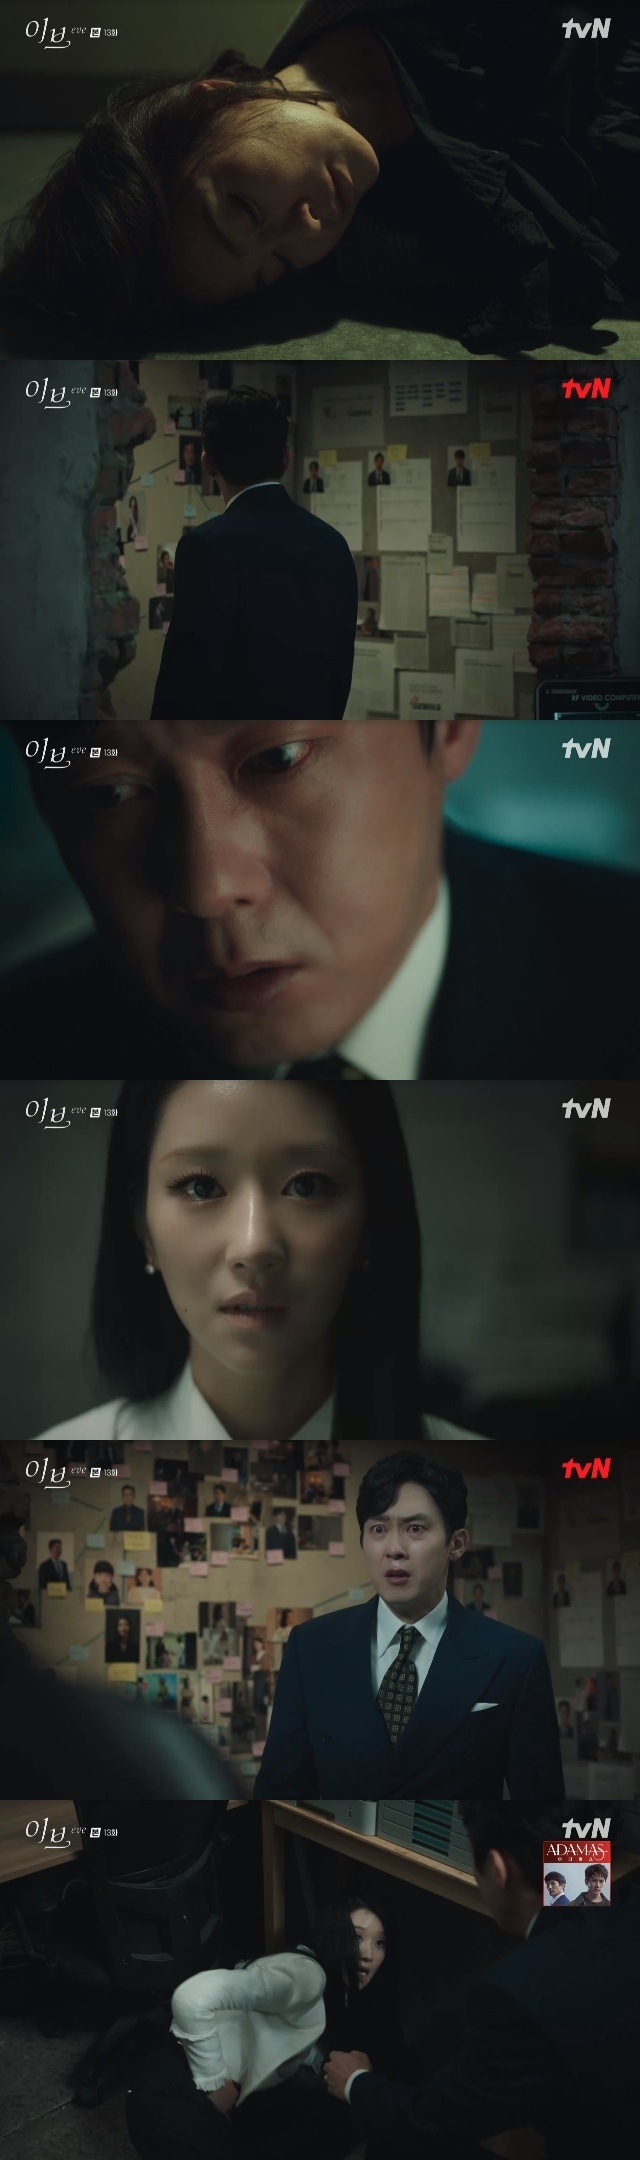 The love of Seo Ye-ji and Byeong-eun Park has been broken.In the 13th episode of the TVN drama Eve (playplayed by Yoon Young-mi and directed by Park Bong-seop), which was broadcast on July 13, the figure of Lee Sean Gelael (Seo Ye-ji), who is caught up in Han Sora (Yoo Sun) and spurred revenge, was portrayed.Han Sora disclosures this Sean Gelaels real name and her daughter, Seo Bo-ram, to Kang Yoon-gyeom (Byeong-eun Park), saying, The doubt that once is doubt will never disappear.A drop of doubt I drop begins to paint clear water, and then it all paints. They will be black. Real fear is not the time.Its a real fear to tighten it up soon. Lee Sean Gelael later told Kang Yoon-gyeom, When my father died and my mother remarried, my name changed. Seo Bo-rams dad is remarried.If I did not say my mother, I thought Seo Bo-ram would be hurt. Kang Yoon-kyum asked, Is there anything I can worry about? And ripped off the picture taken by Han Sora in front of Lee Seel.I talked to you on the beach, but if you have something to hide, you can be comfortable with it. Its okay. Were starting now.However, as Han Sora said, a drop of doubt has already begun to dye Kang Yoon-gyeom.Kang Yoon-gyeom began to follow her when she said that Sean Gelael did not attend the meeting again, and found out that she was in contact with Seo Eun-pyeong (Lee Sang-yeop).Kang Yoon-gyeom went on to chase Lee Sean Gelael.In the meantime, Seo Eun-pyeong also noticed Kang Yoon-gums tailing, so he deliberately called Kang Yoon-gum to inform him that he was attacked, and pretended to suspect Kang Yoon-gum behind the perpetrator.Animosity towards me, meeting with Sun Bin Lee (Sean Gelael), being attacked and not spoken, which is one thing to explain: does Sun Bin love you? asked Kang Yoon-gyeom.Then he said, She already chose me. What is so proud of her?Seo Eun-pyeong admitted, How is the love of the president? My love is sacrifice. I am only worried about what I can do.I do not see a man who is suspicious, followed, but says love as a competitor.I am confident that Sunbin will not be next to him soon, he criticized the act of following Lee.Meanwhile, Lee Sean Gelael met with Han Sora and was in a reverse threat.Han Sora knew that he was having an affair with Moon Do-wan (Cha Ji-hyuk), who was stored as Dr. Kang, and that he was behind the attack on Seo Eun-pyeong, the chief of staff of Cheong Wa Dae.When this is all known, Lee said, Can you live in Korea rather than regain your husband? I will give you one day. Send Jean Hee back by midnight tomorrow.If you send me safely, I will leave the hall. Your flower garden Maangchi, Maangchi, but not yours.It is a condition that you do not touch the hair of Mr. Moon Hee.Since then, he has been looking for the original version of the Jethics semiconductor contract in Kang Yoon-gums safe, but Kang has already changed the secret number of the safe.He was watching all of this Sean Gelaels behavior with the camera he had installed.However, Kang called Lee Sean Gelael and suggested, Can you bring me a box with a ribbon in the safe? And then he gave me the Secret number.Lee Sean Gelael, who secured the original contract, informed Seo Eun-pyeong that he would leave the river tonight.Han Sora came directly to Kang Yoon-gum and said, I approached him with my mother. I am against us. I was trying to hurt us.Then, Kang Yoon-kyum, who was watching this Sean Gelael take out the original contract, said, Davie Mom. You have not loved me?I have overcome a million reasons why I shouldnt love Sunbin. I can give him everything I need.You give up now for you, he said bitterly and left.At the same time, the brinkman (the former head of the National Exchange) learned about the LY Victims lawsuit, which was represented by Jean Hee.The brinkman told them to find out about the fact that they had evidence that Jethics had been illegally merged, and knew that there was a Moon Hee behind it.In the end, when the brinkman asked Moon Hee to come to the brinkman (Cha Ji-hyuk), Changs personal life passed to the brinkman.Lee tried to hurry away to save Jean Hee as promised by Han Sora, but Kang wanted to meet him in person, saying he had something to say.Then Kang Yoon-kyum called Sean Gelael to the house where the two will live and suggested with the children, Lets live together here, lets start a new house.Kang Yoon-kyum also handed over a power of attorney to Lee Sean Gelael, who said, Eve if there is something I can not tell you, it does not matter to me at all.In Kang Yoon-gyeoms love, this Sean Gelael burst into tears. Then she said, Why? Well be happy in the future.We will go to Buenos Aires and we will also tango there. I gave the safe to the chairman himself, said Lee Sean Gelael, who gave it to Seo Eun-pyeong, who had secured it. If I hesitate, I do not have to give up the original contract.I just want to tell you everything. You asked the president what kind of love he had.I can not say love, but I want to be honest once with the least courtesy of my feelings. Later, he promised to meet Kang Yun-gyeom separately, but while waiting at the appointment, a signal came from Jean Hee, who was trapped in a dungeon of the house in the brink.Kang Yoon-kyum, who came to see Sean Gelael late, was told by his father that Jang Hees daughter prepared a lawsuit with Jethixs daughter.Kang knew that Jean Hee was the mother of Sean Gelael.A similar time, while looking at the complaint of the LYVictims regiment, Han Pan-ro found out that his house had a bug.Kang went straight to the Secret safe and found the Jethics contract gone.Then, when he realized the real identity of Sean Gelael, he began to search for Sean Gelael.At that time, Sean Gelael tracked down Jean Hee and found out that she was near the house of the brink, and Seo Eun-pyeong was also delivered to the house of the brink.Kang Yoon-gum confirmed that the car bonnet of Lee Sean Gelael, which was built in front of the dance institute, was warm, and noticed that she was in the dance institute.Then, surprised by the noise that smashed something, he came out to check it out, while Kang Yoon-kyum approached the secret space of Lee Seel in the academy.Kang Yoon-gyeom was shocked by the betrayal when he realized that Sean Gelael had come to him in a thorough design for revenge.Behind this, he appeared: What the hell is this? How could you do this to me? Hacked your phone?I do not think its the first time we were together, he said, throwing a cell phone. Its so dense and it can not be so cruel.I thought you needed money. Thats not enough. This is so horrible. You should have greeded for something else. I can give you everything.I can do anything for you. Why did you do it to me? 